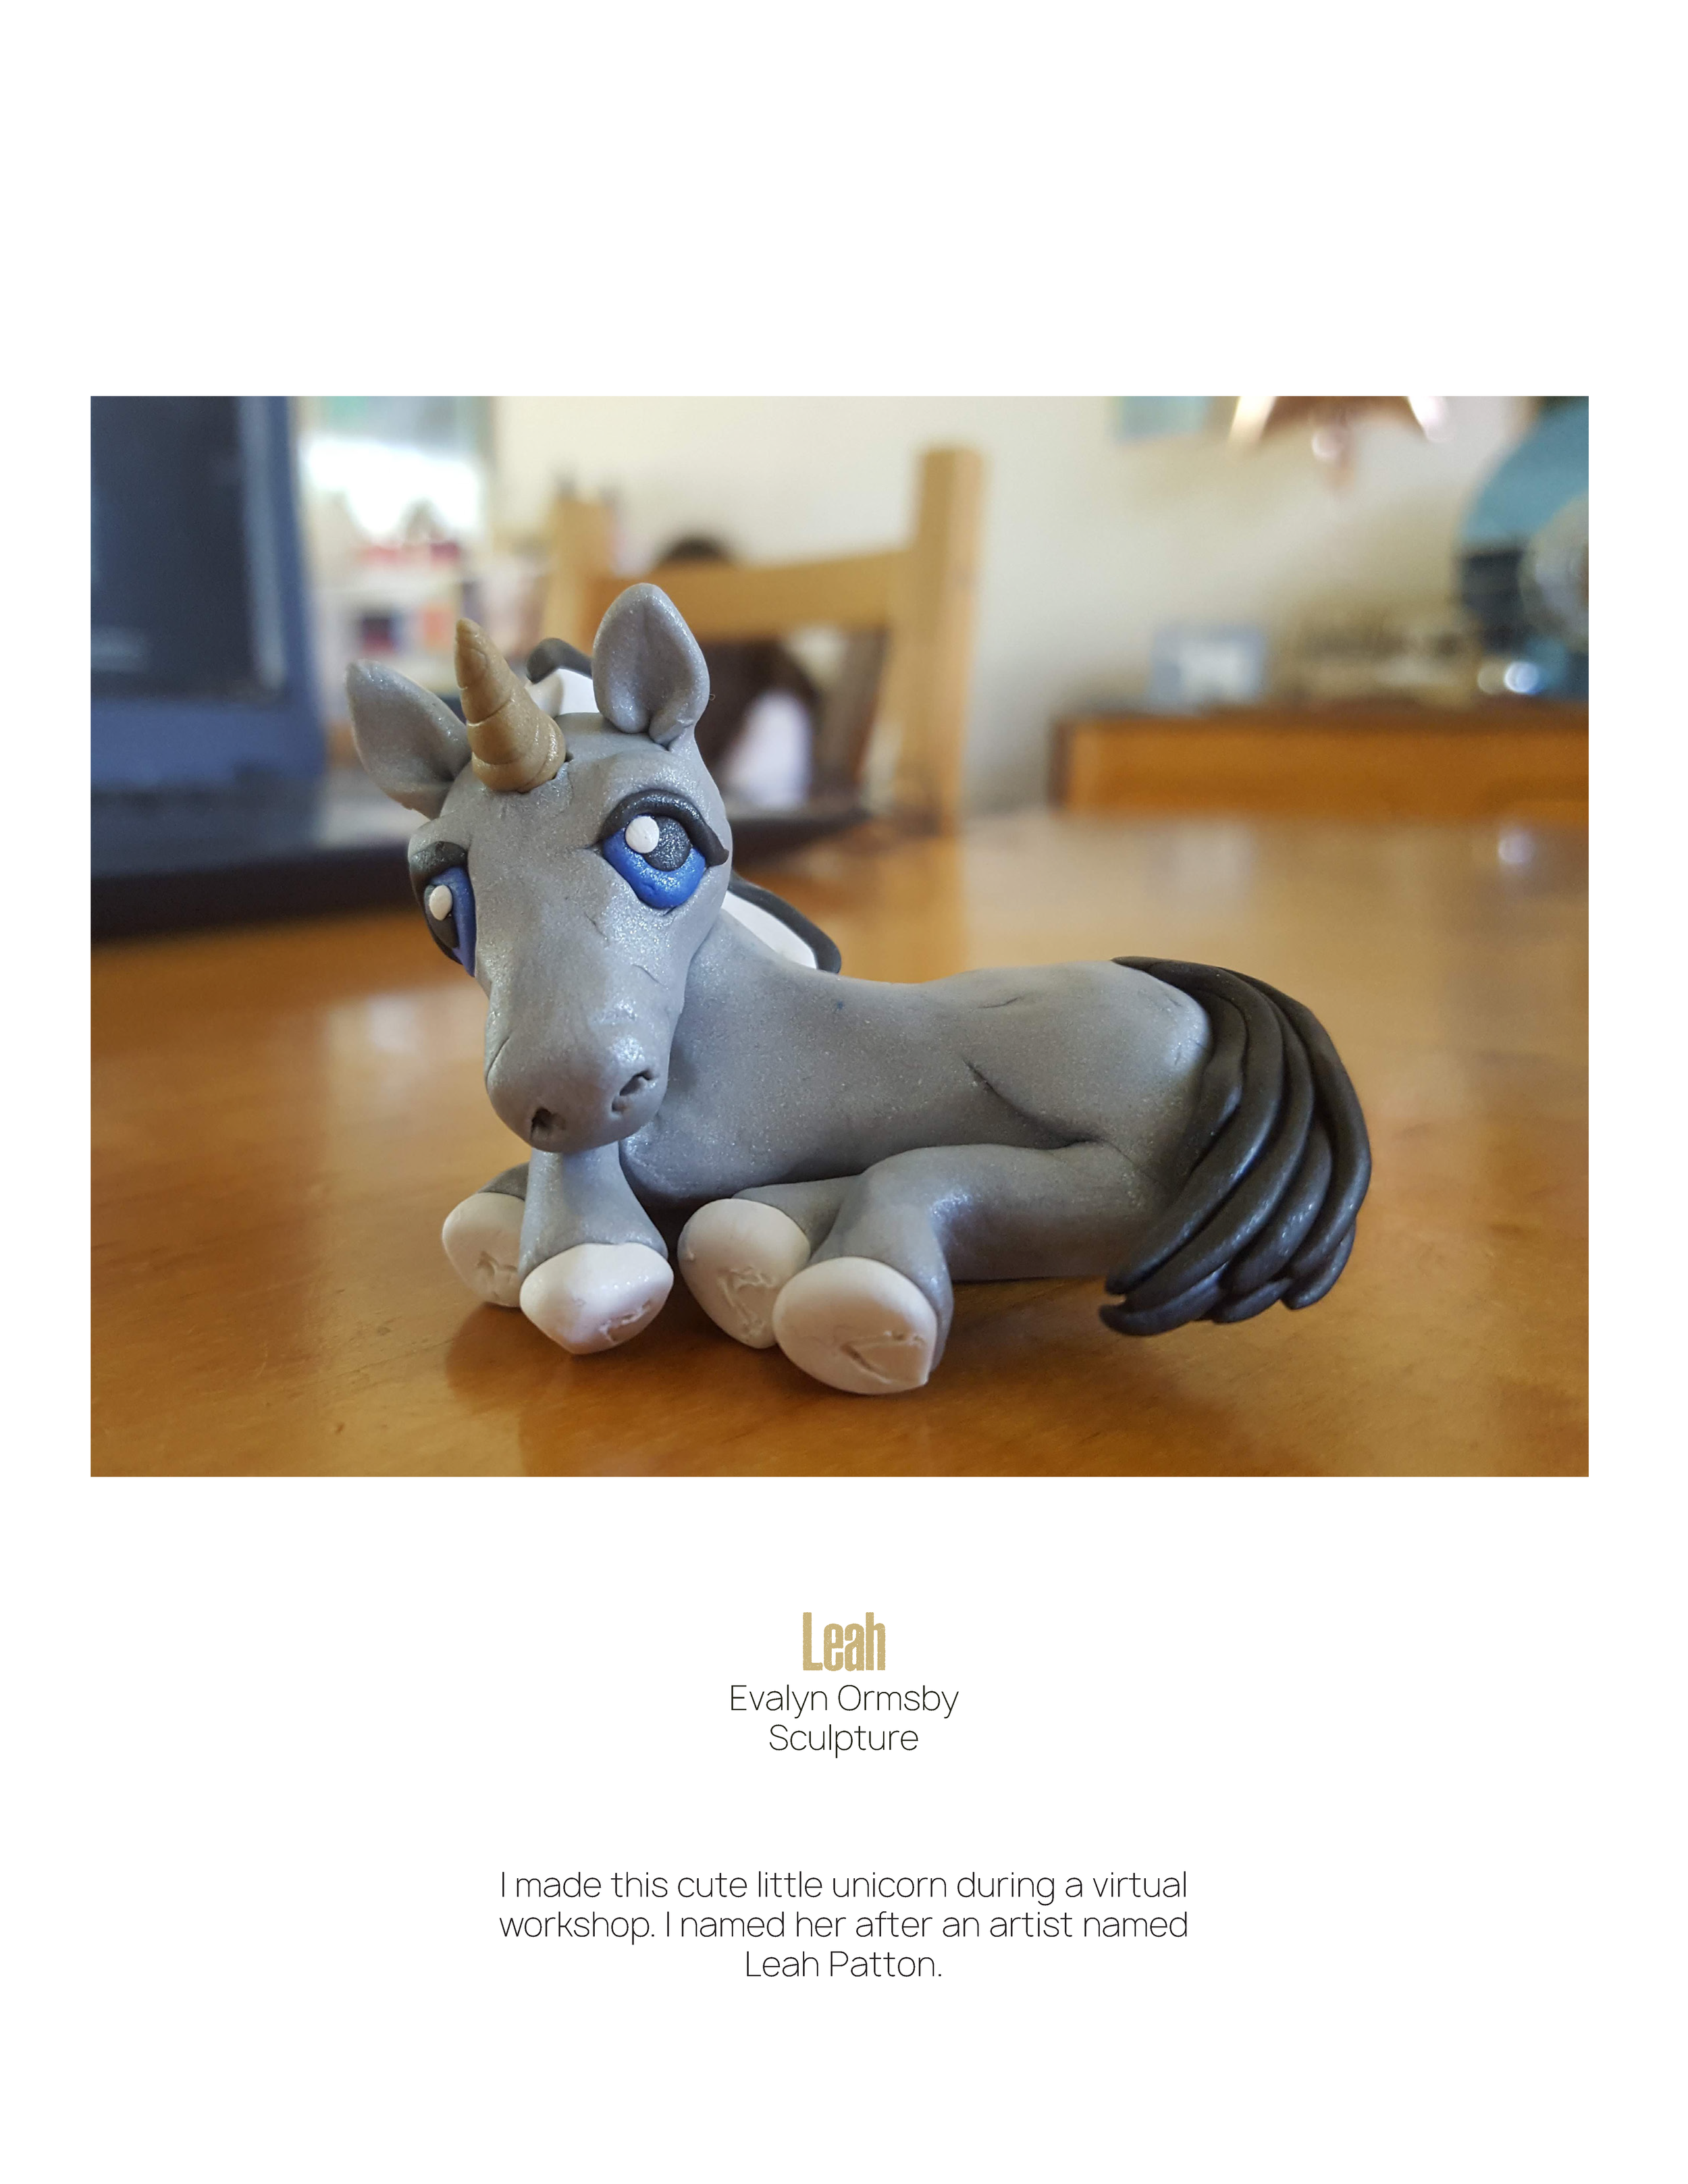 Leah by Evalyn Ormsby, Sculpture of cartoon unicorn